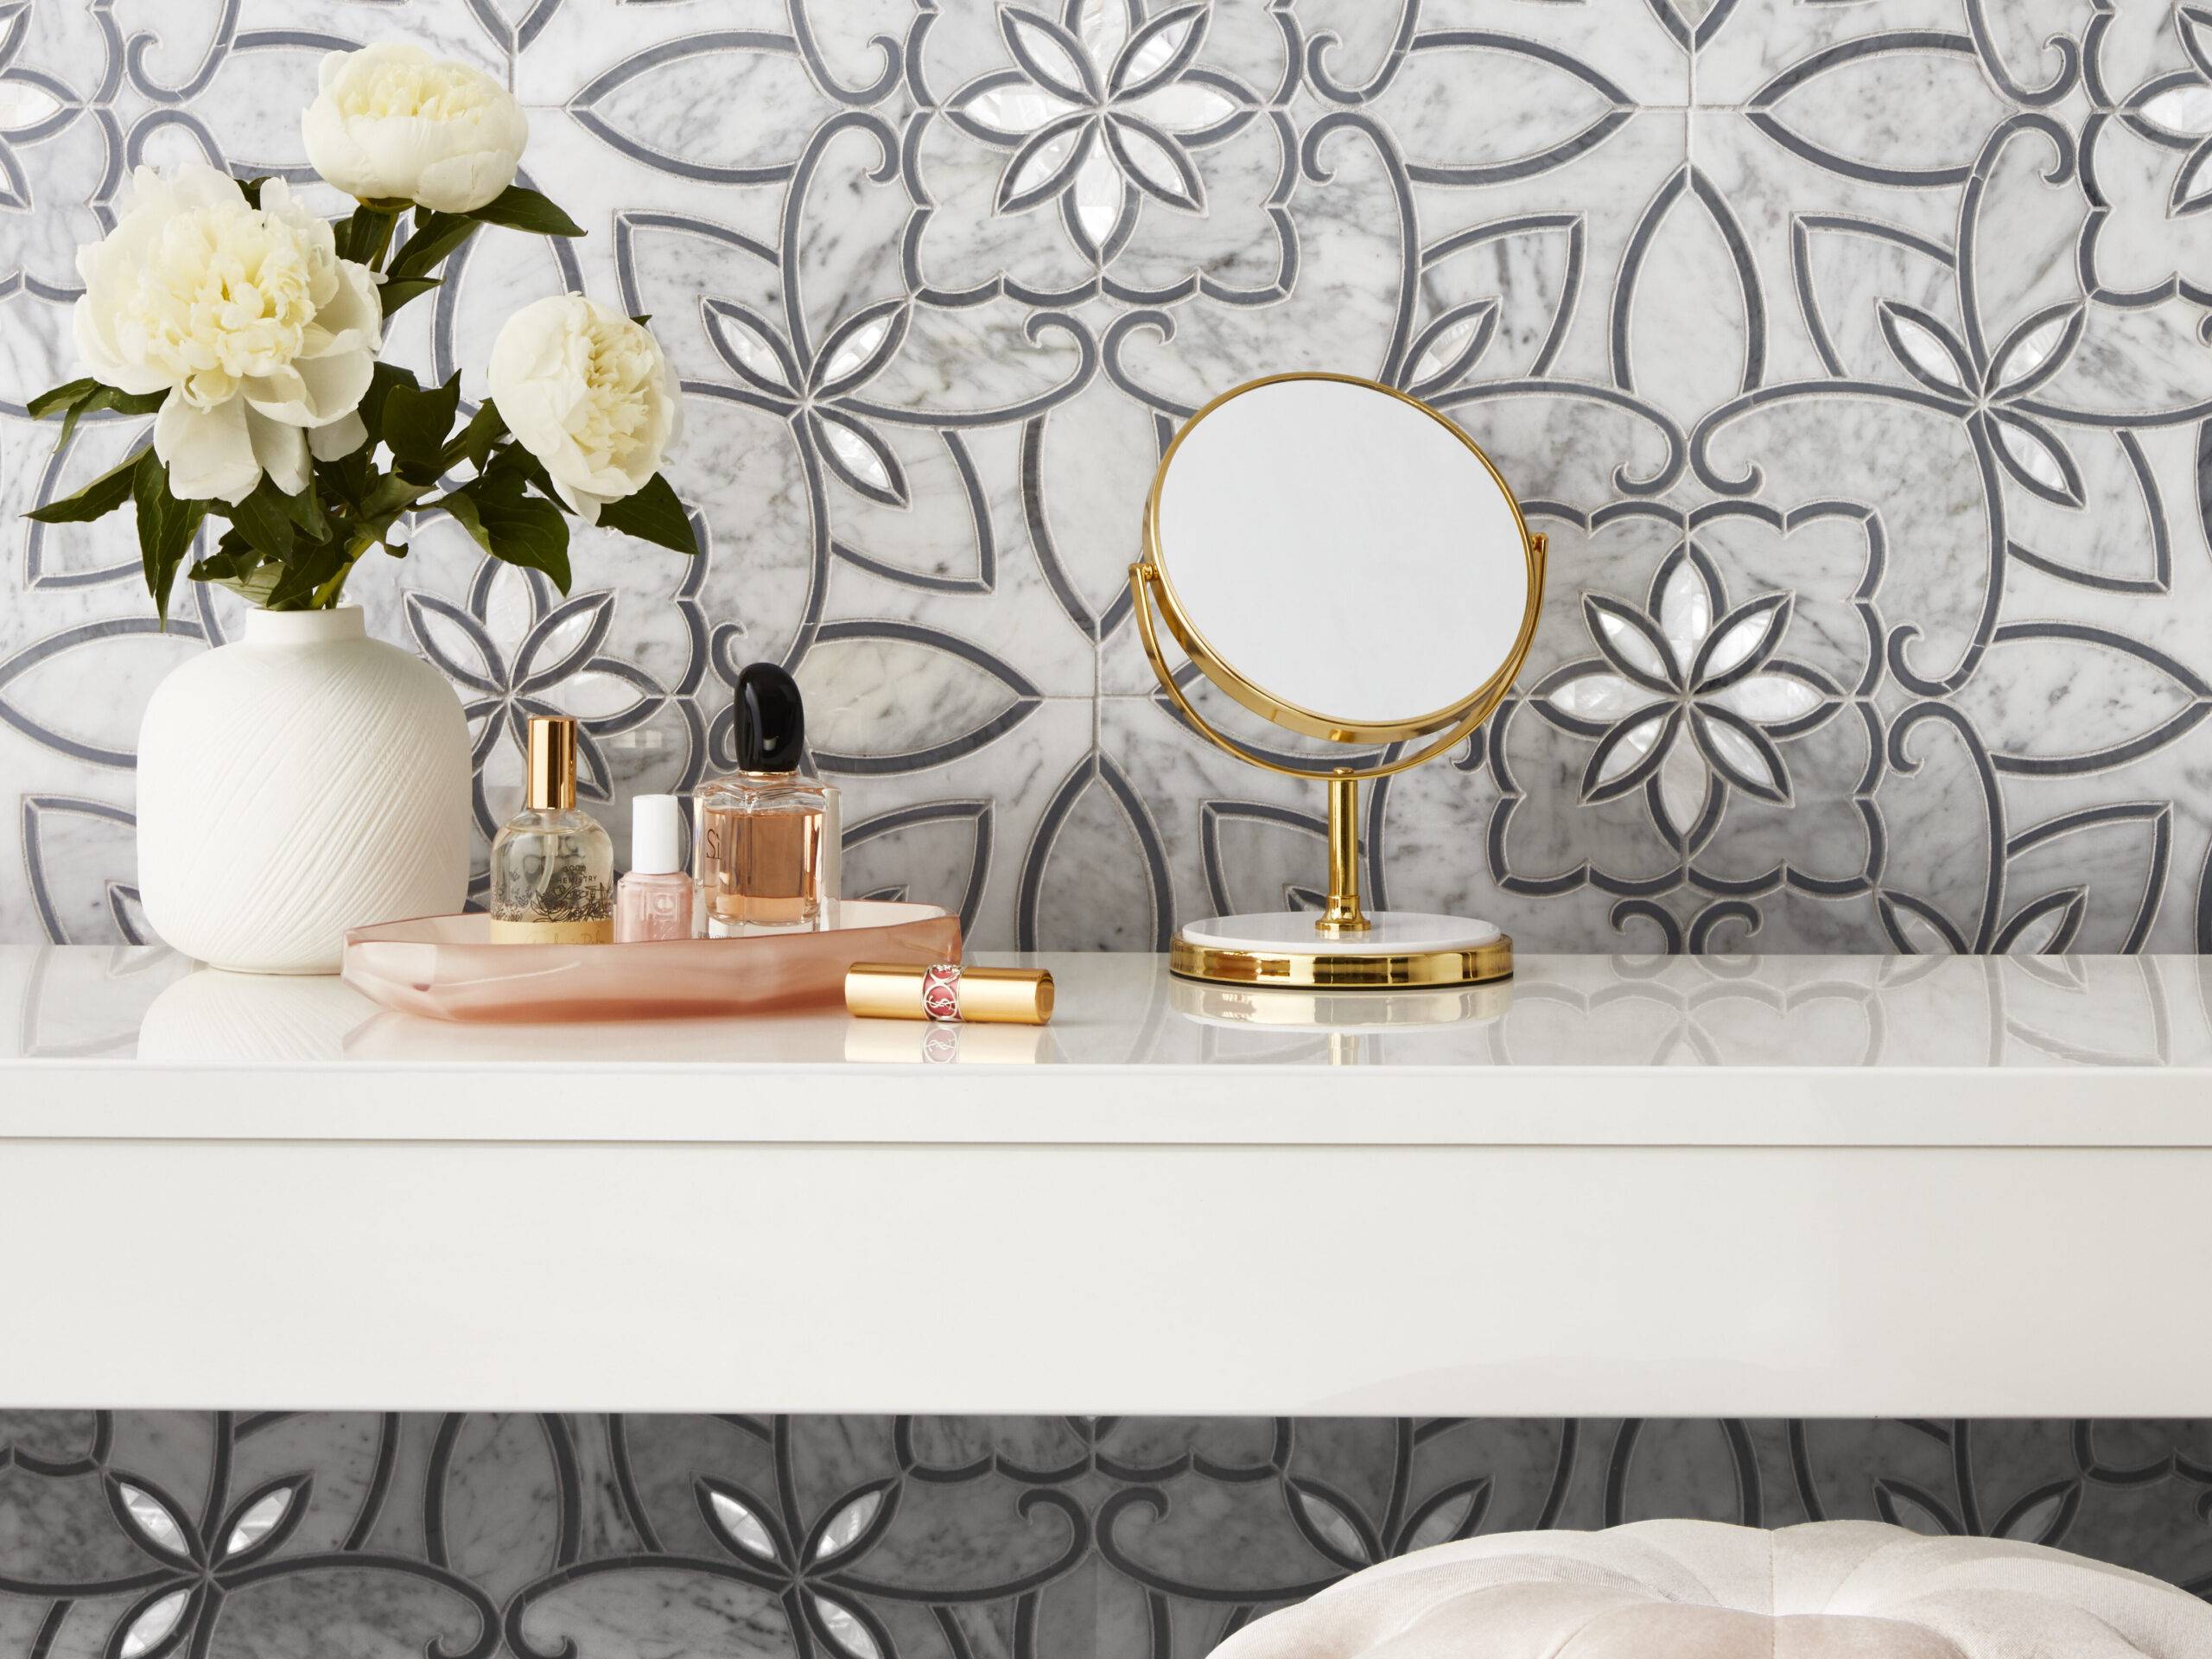 White marble mosaic with grey flower pattern on wall of elegant powder room.